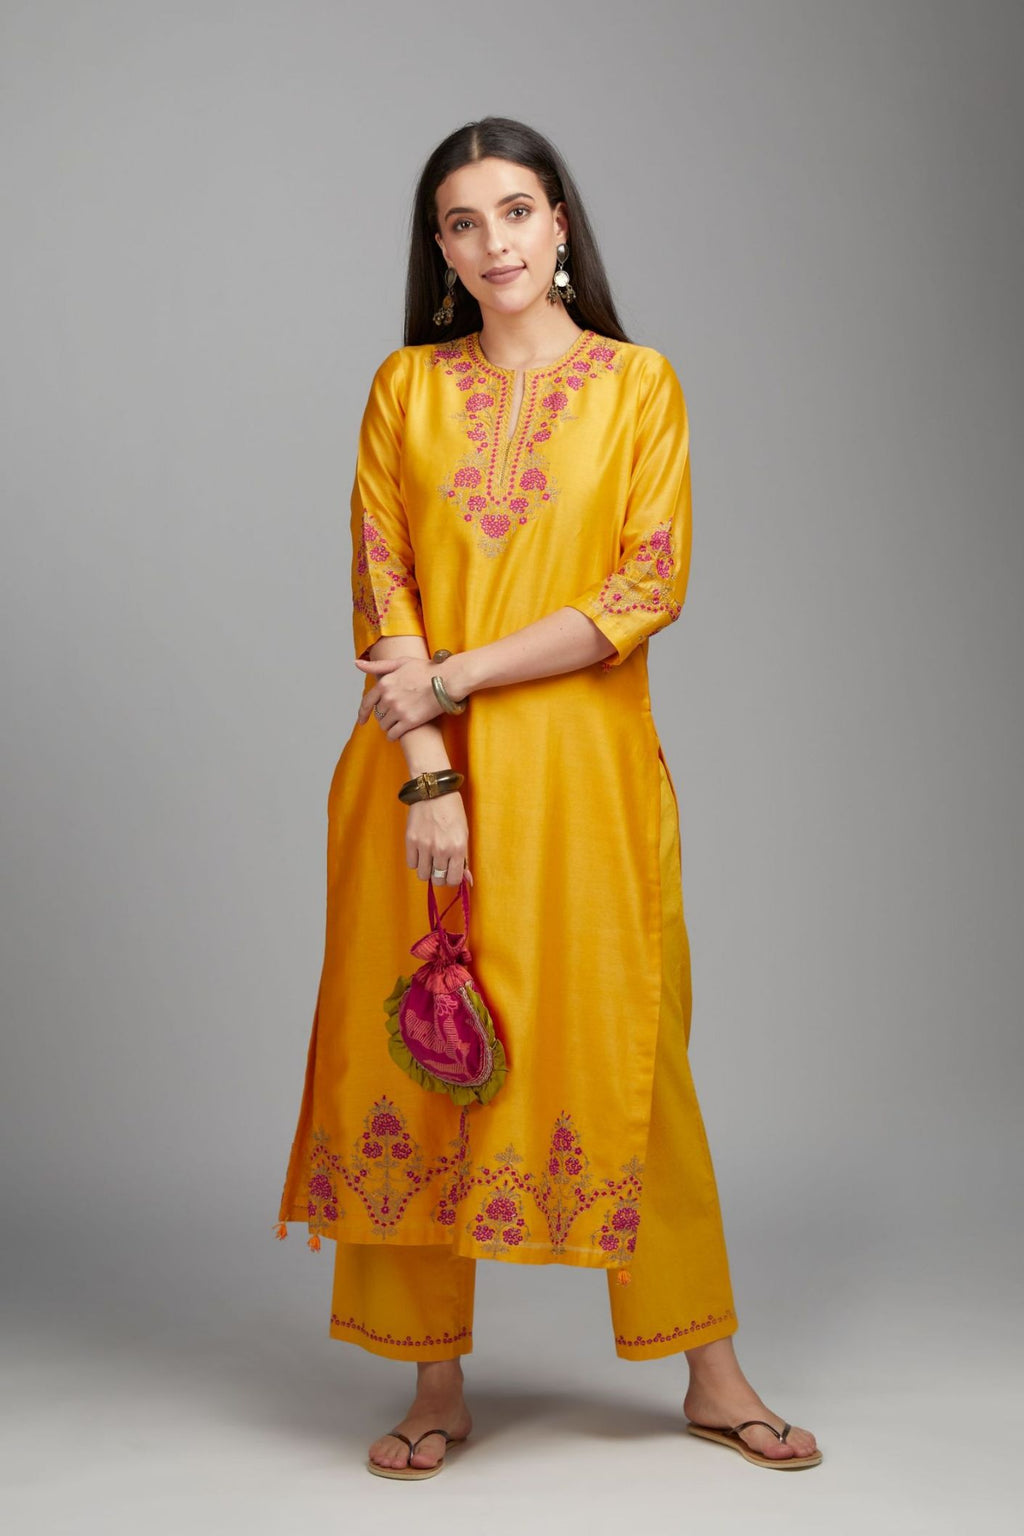 Mango yellow straight kurta set detailed with contrast coloured embroidery at neck and hem